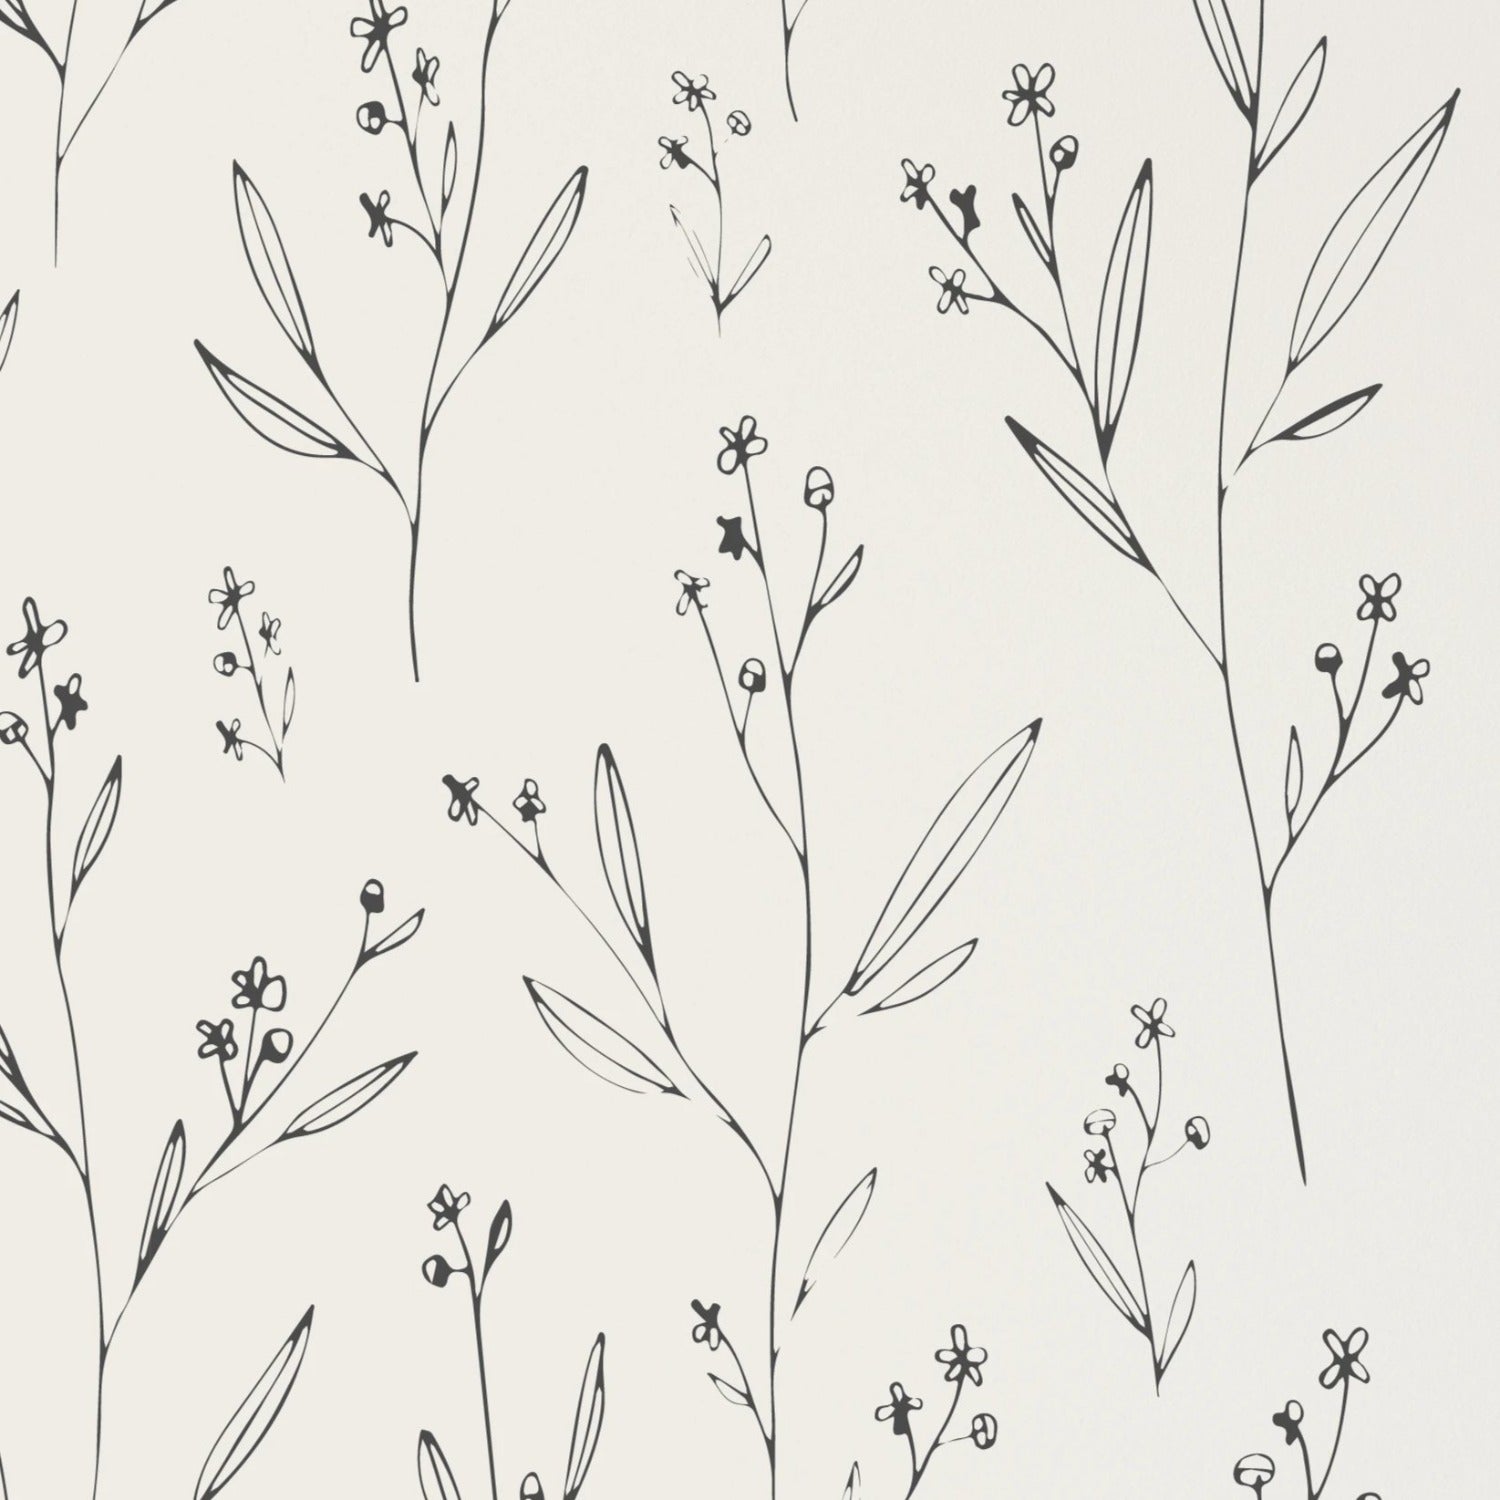 Lavender Overall Dainty Floral Wallpaper  Floral wallpaper Vintage floral  pattern wallpaper Floral pattern wallpaper